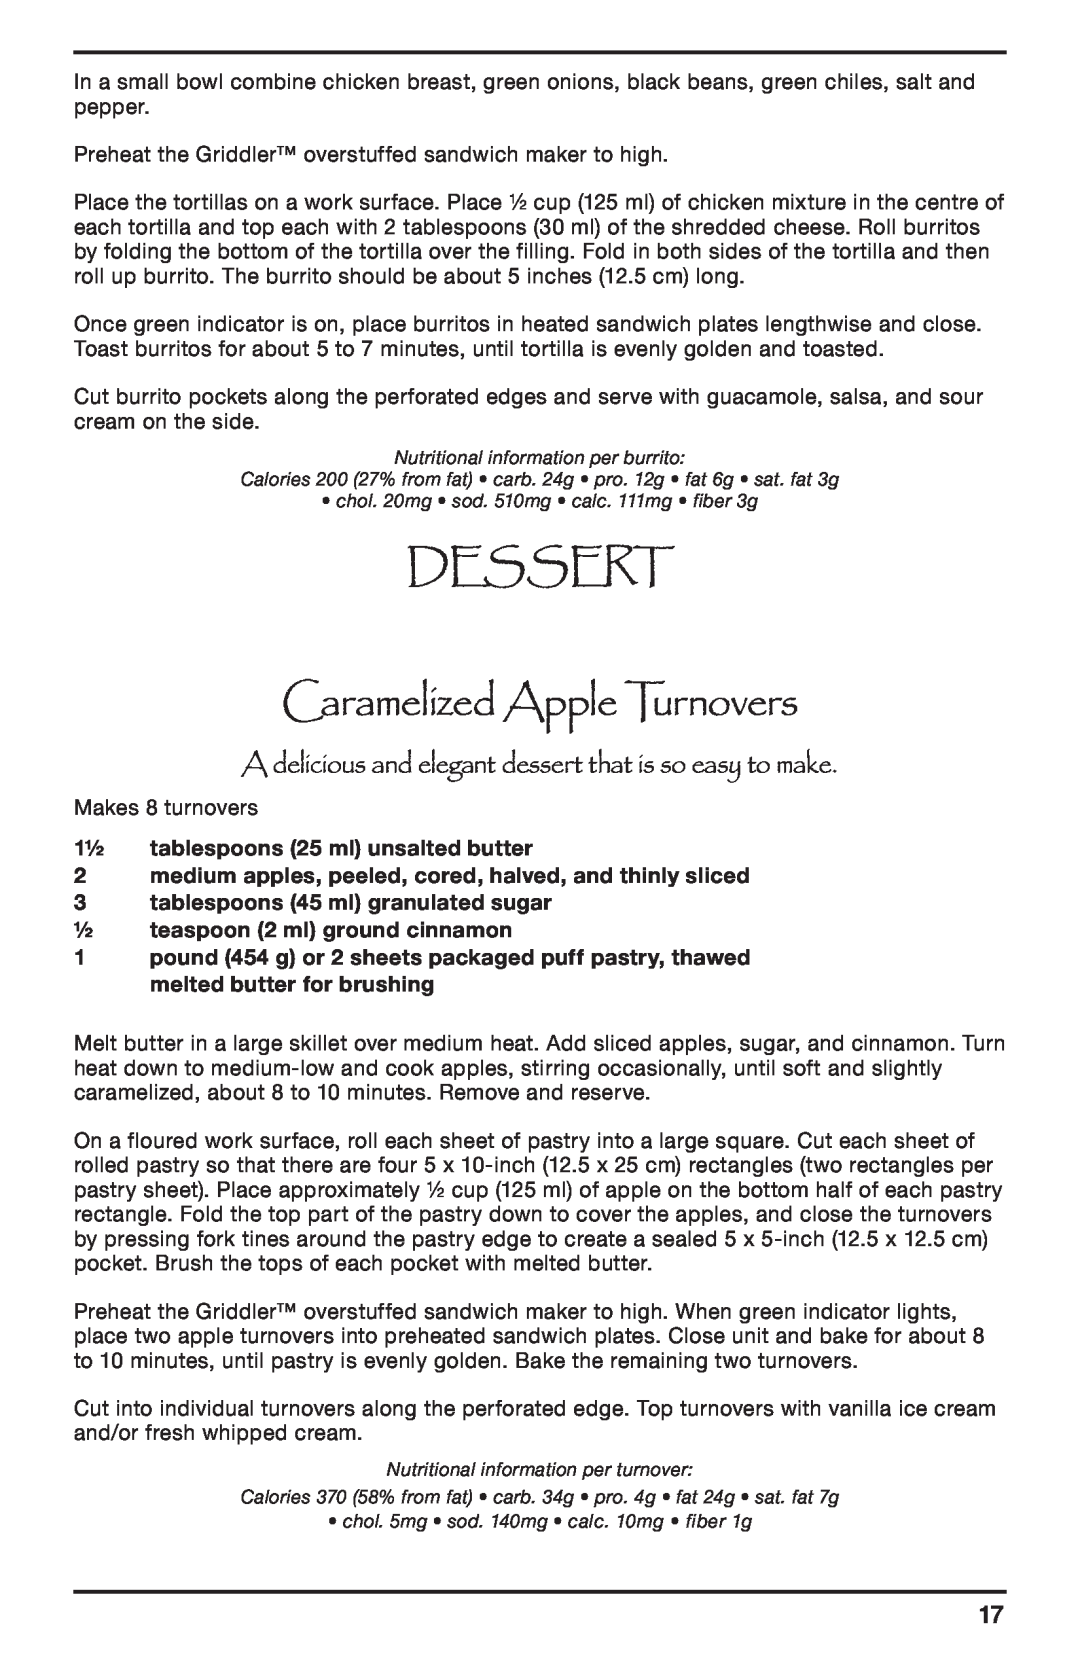 Cuisinart CGR-SMC manual Dessert Caramelized Apple Turnovers, A delicious and elegant dessert that is so easy to make 